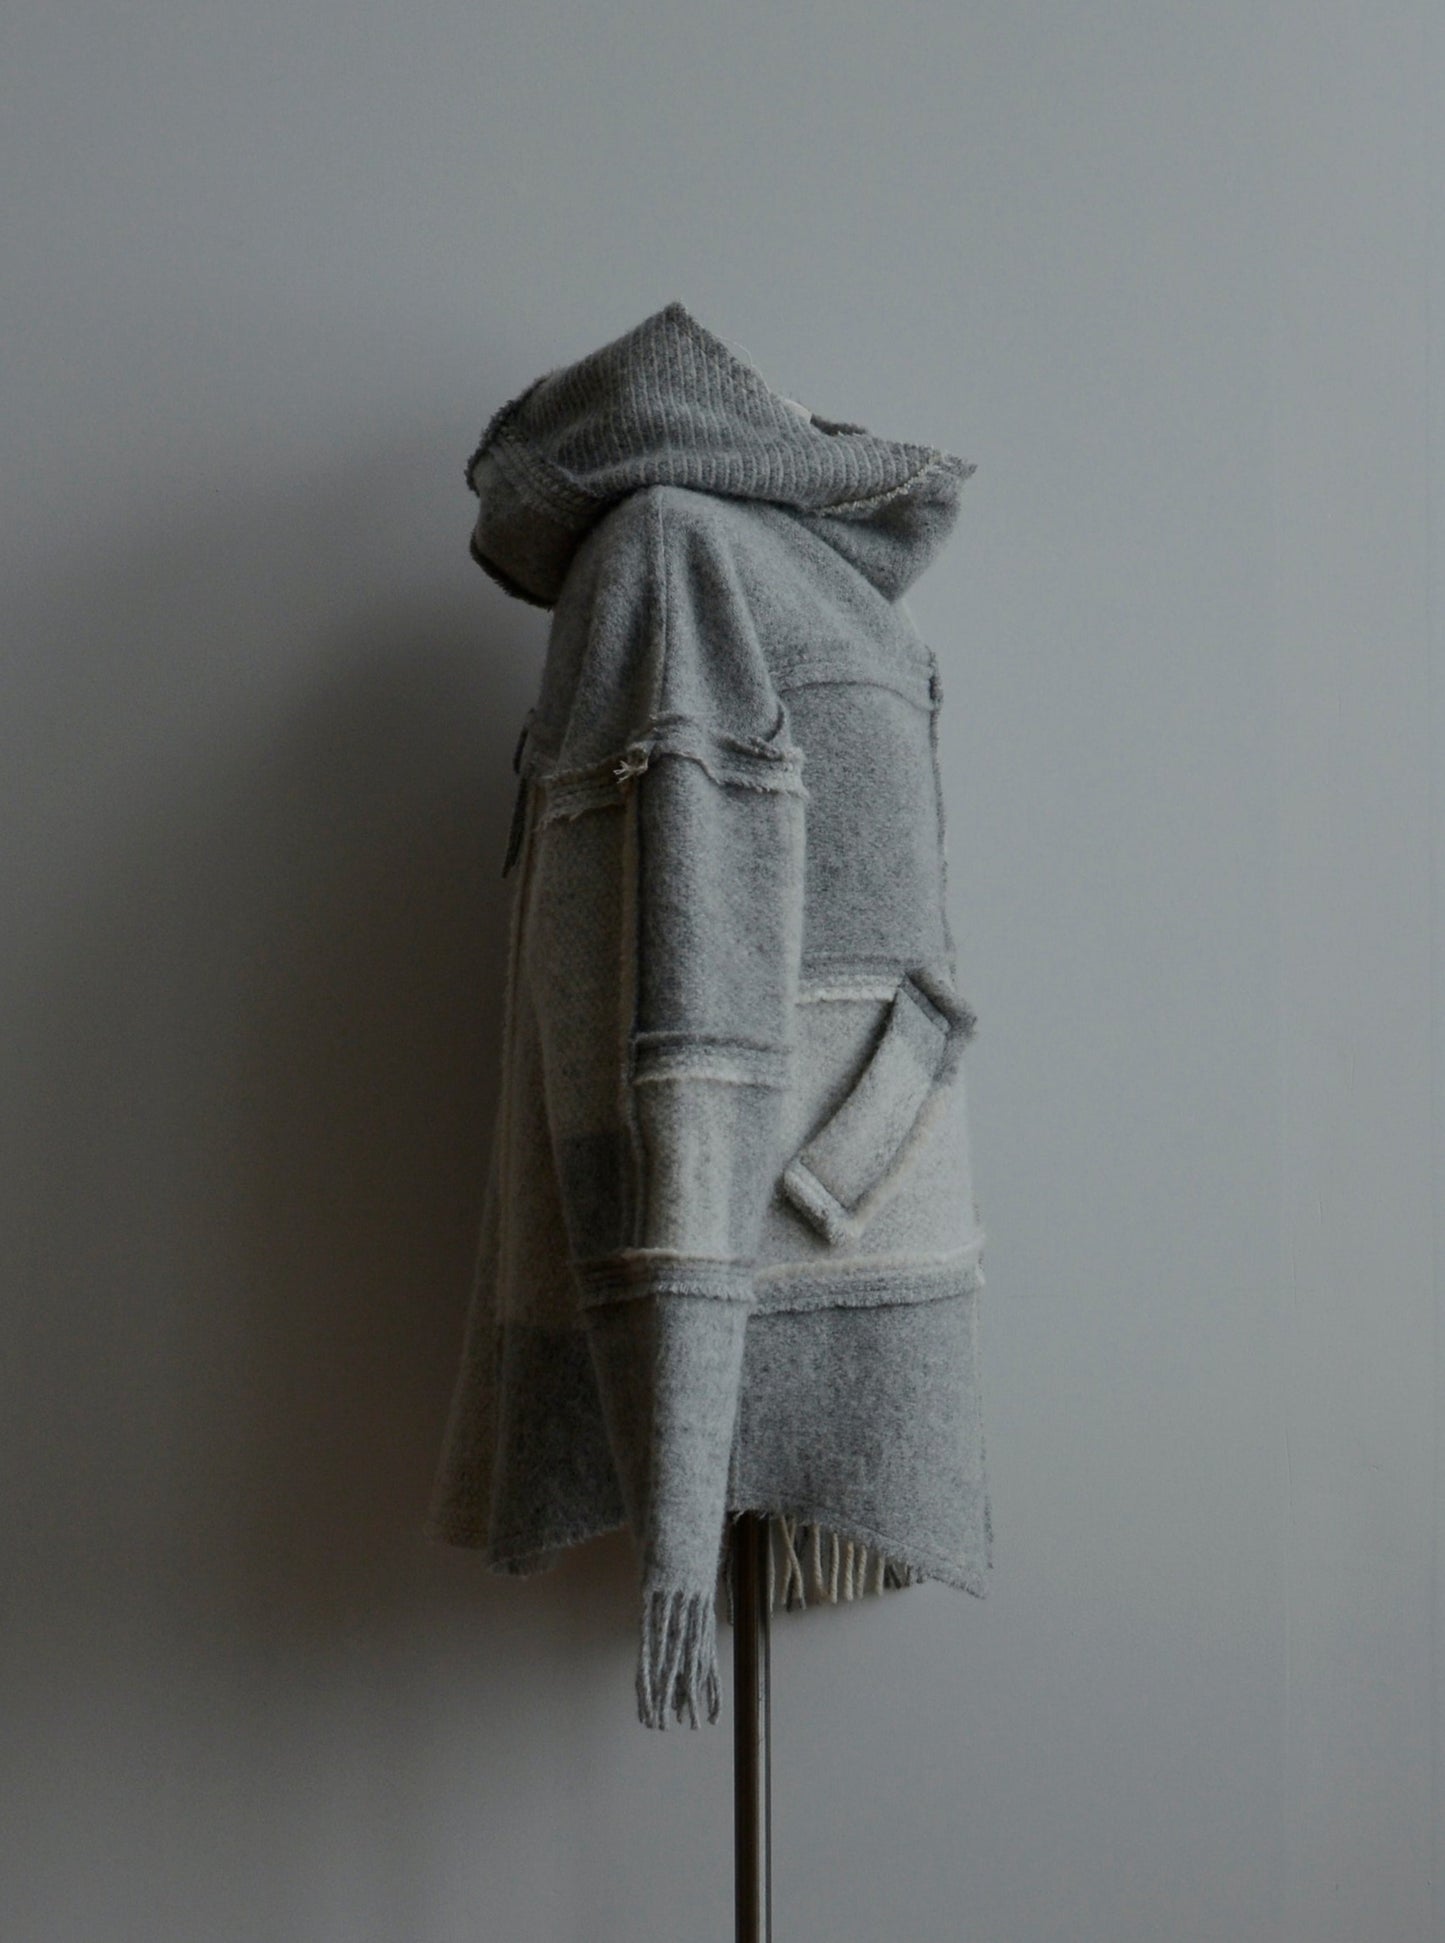 OZOLS Wool Hoodie in light gray (Size XS/XL)